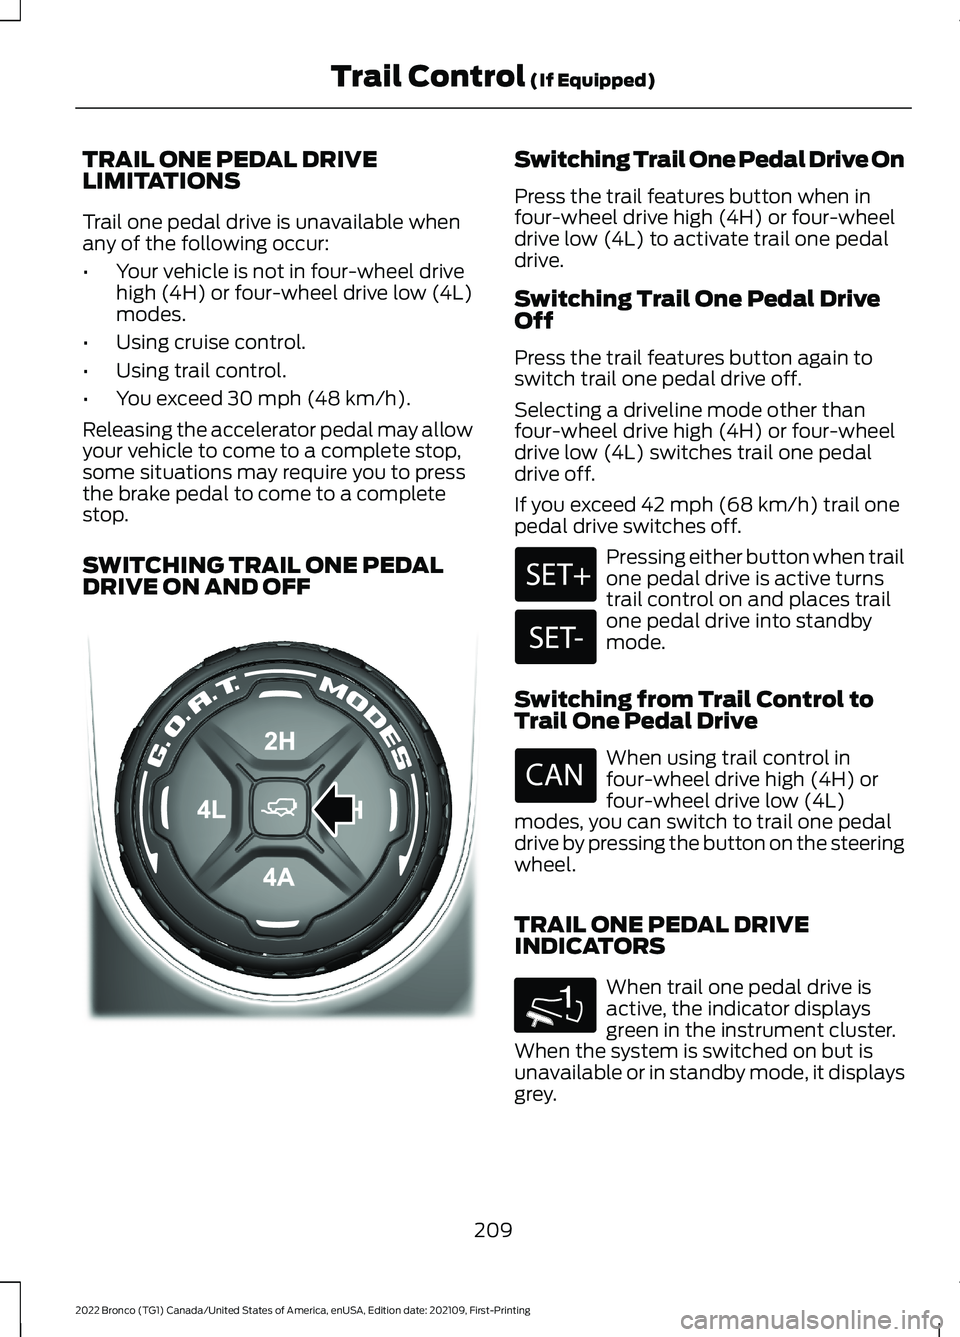 FORD BRONCO 2022 User Guide TRAIL ONE PEDAL DRIVELIMITATIONS
Trail one pedal drive is unavailable whenany of the following occur:
•Your vehicle is not in four-wheel drivehigh (4H) or four-wheel drive low (4L)modes.
•Using cr